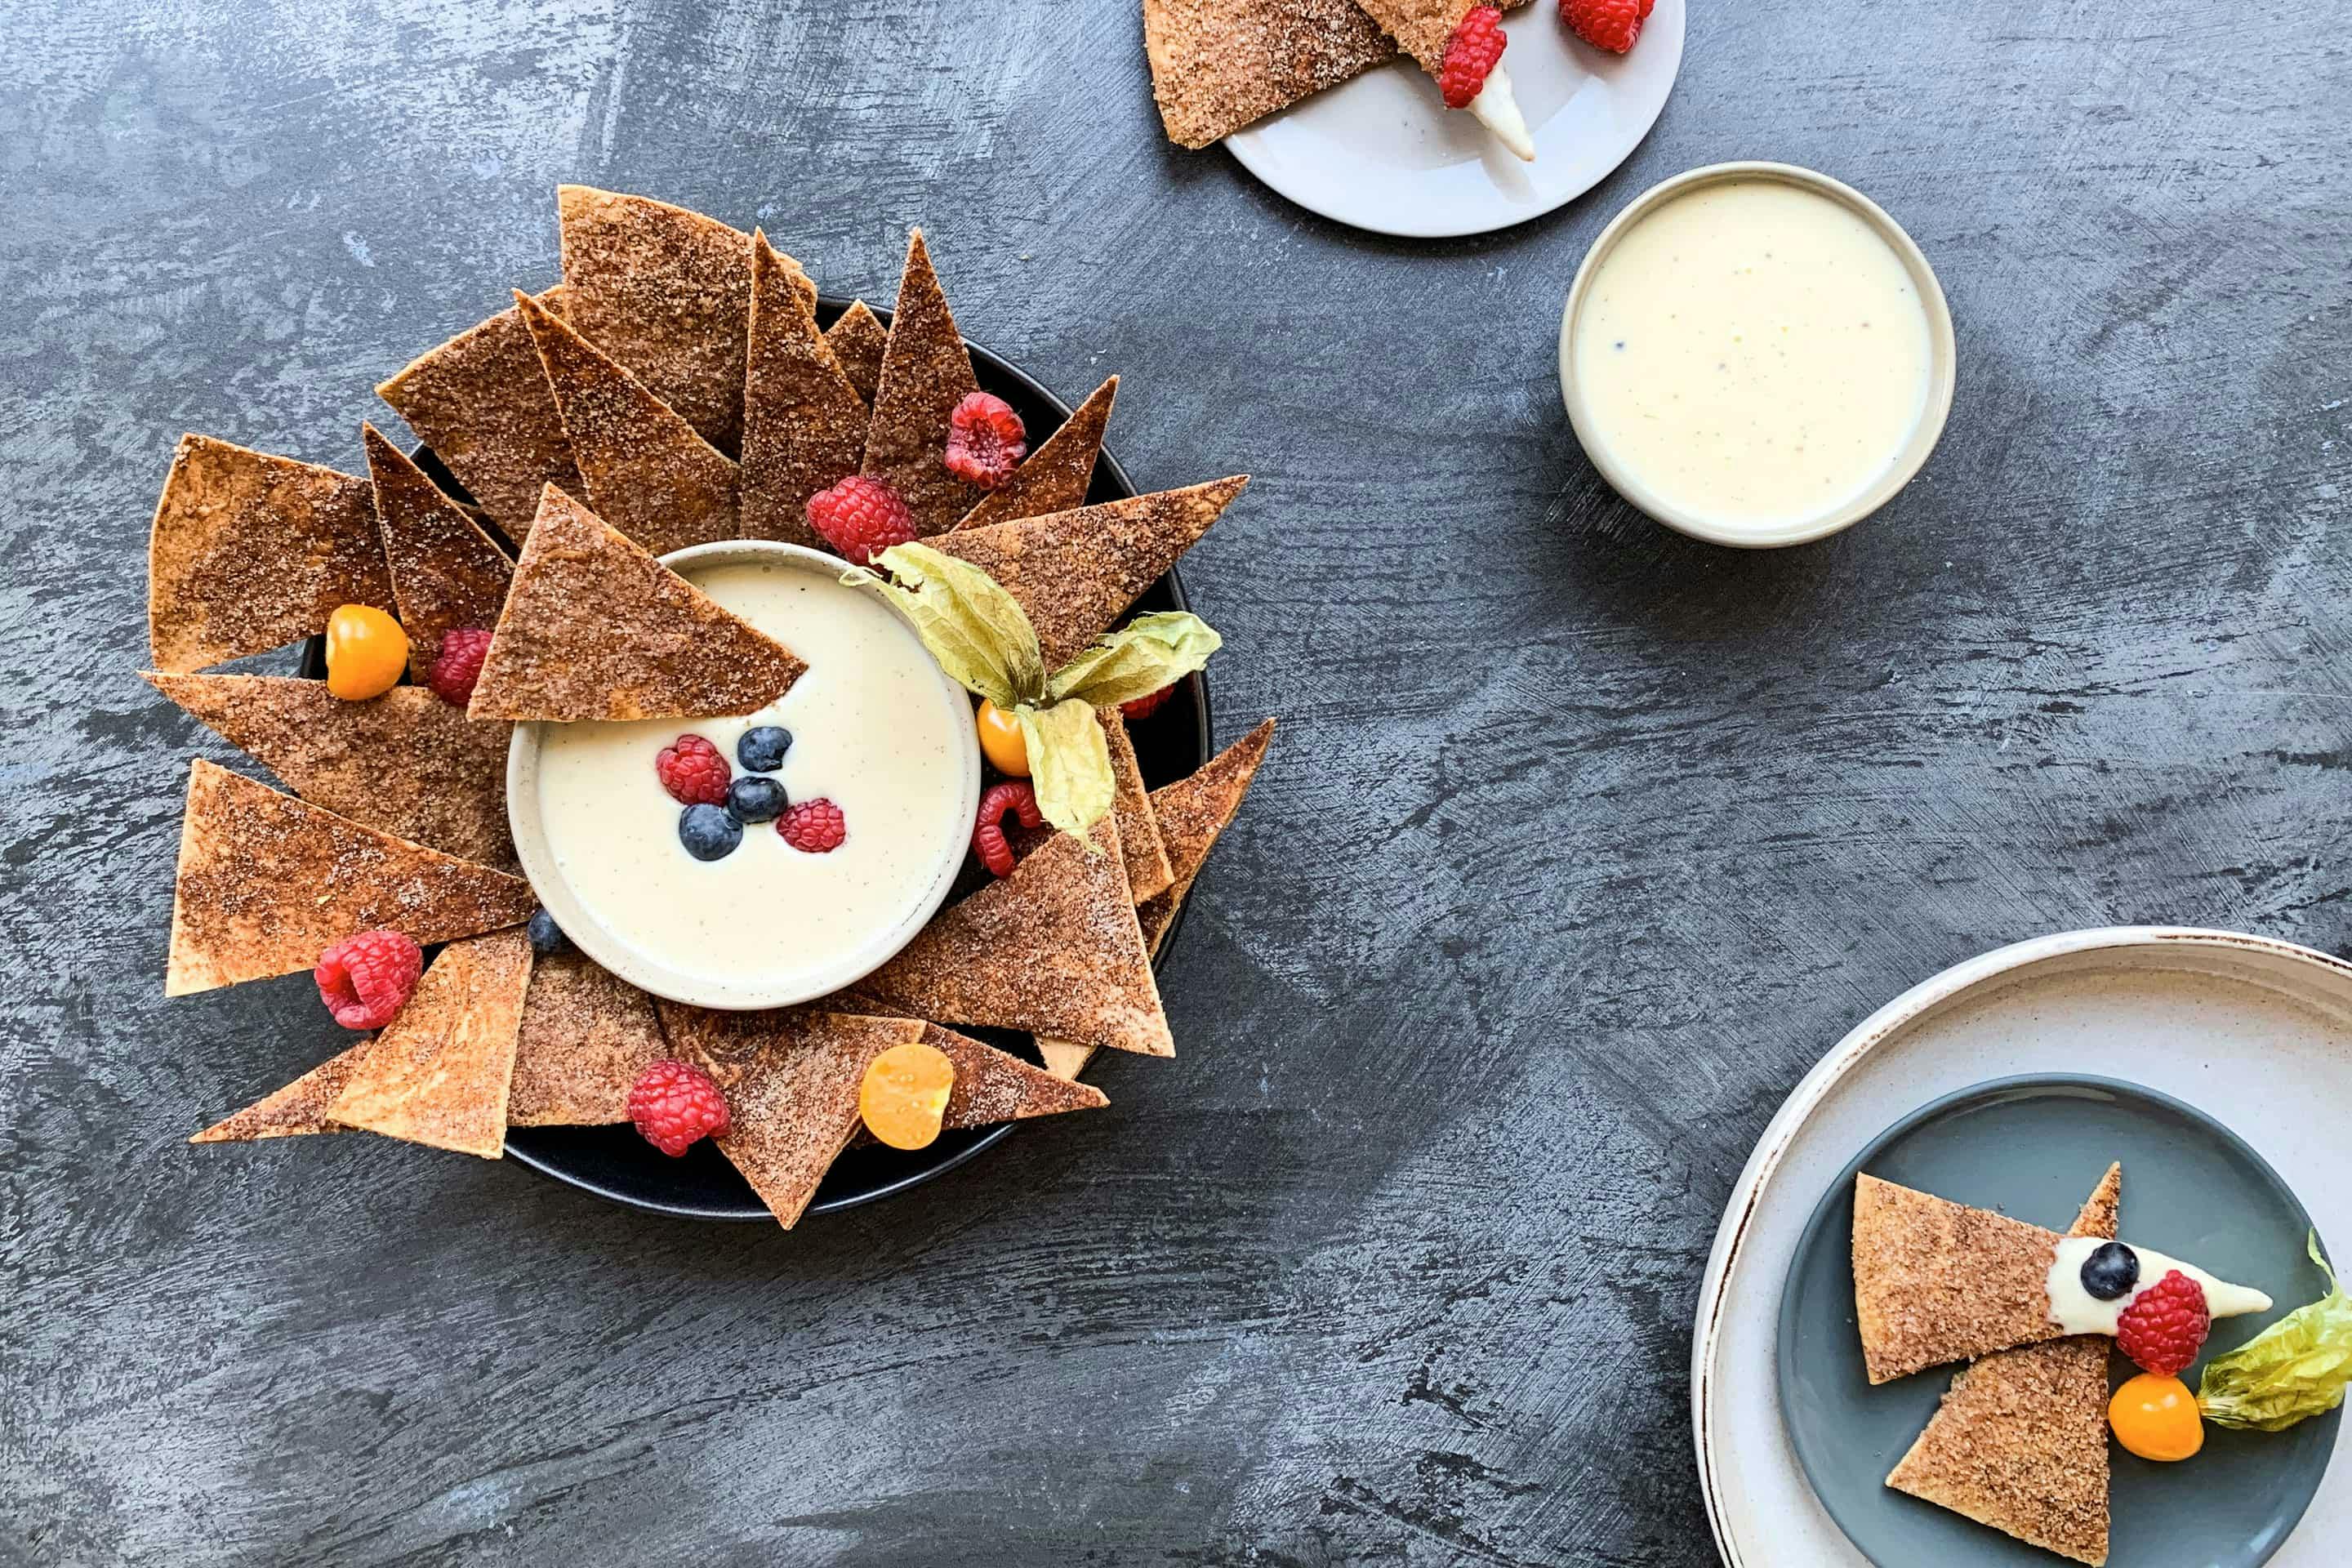 Sweet tortilla chips topped with vanilla dip and fresh berries